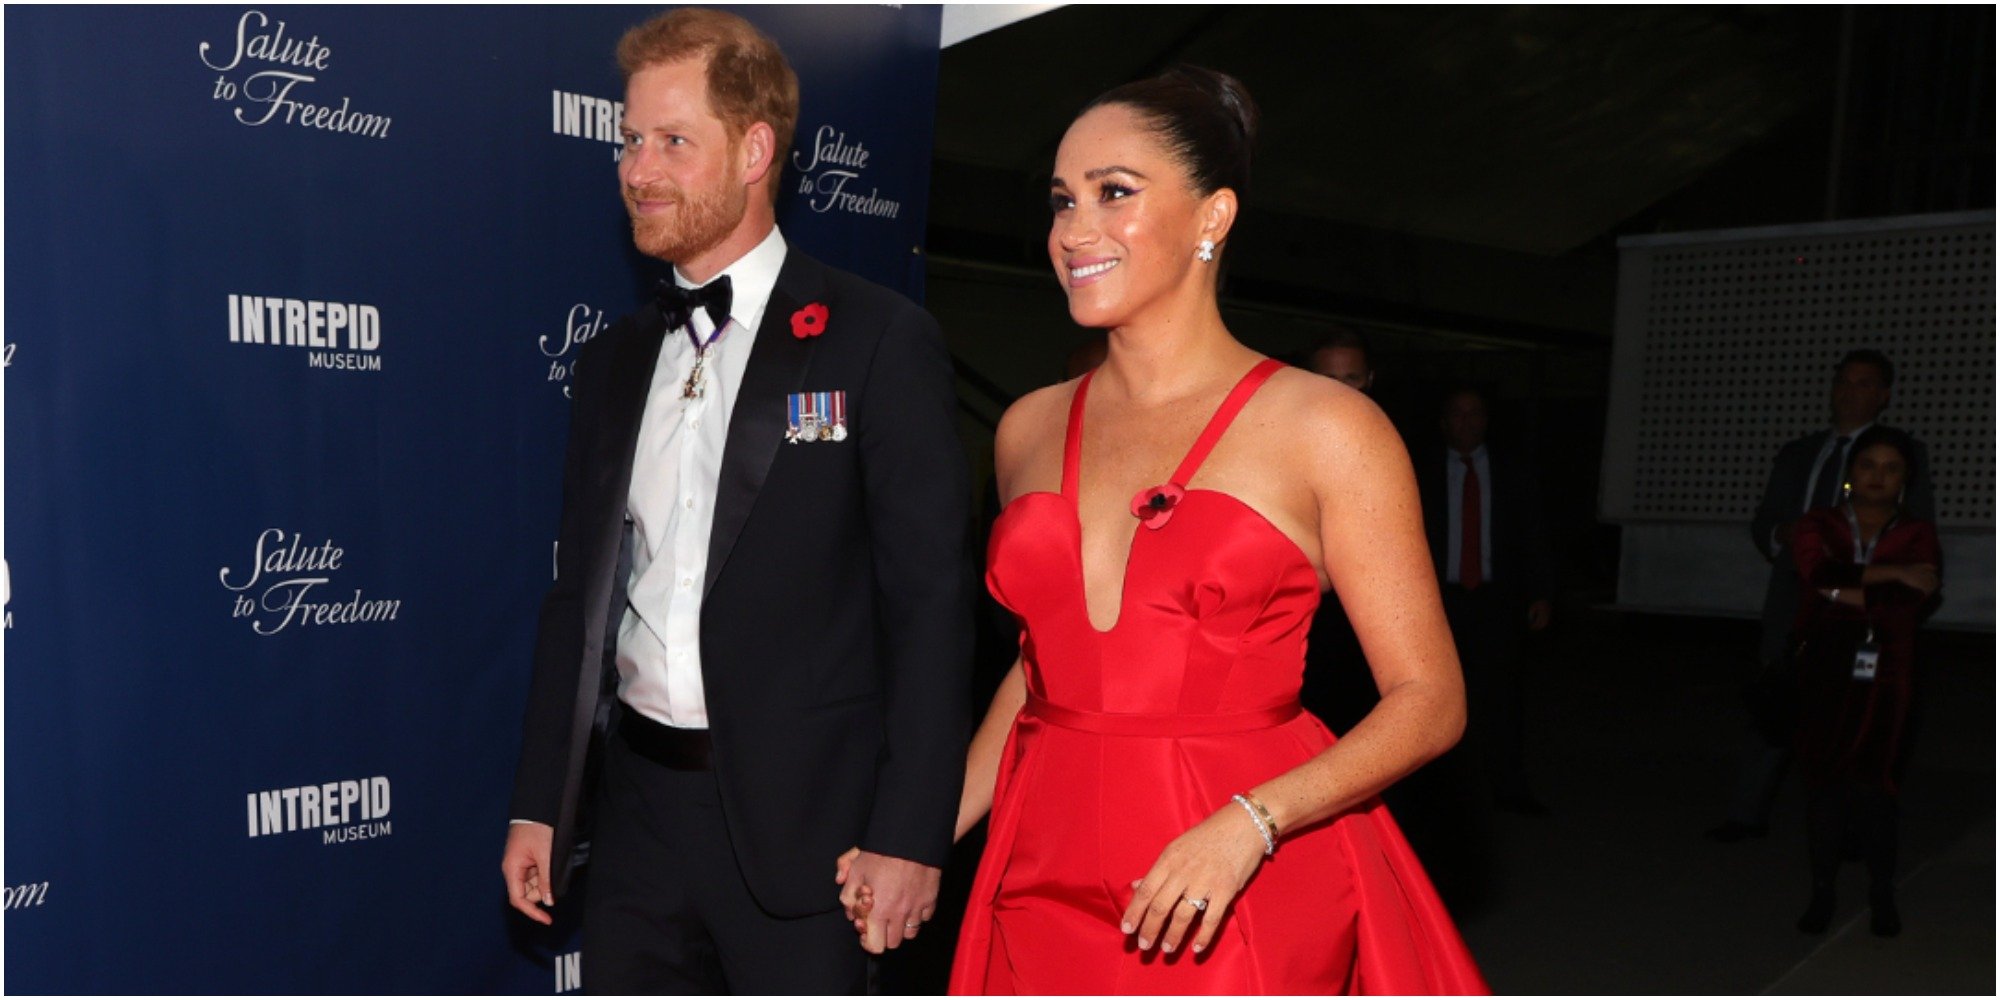 Prince Harry and Meghan Markle dress for a red carpet event